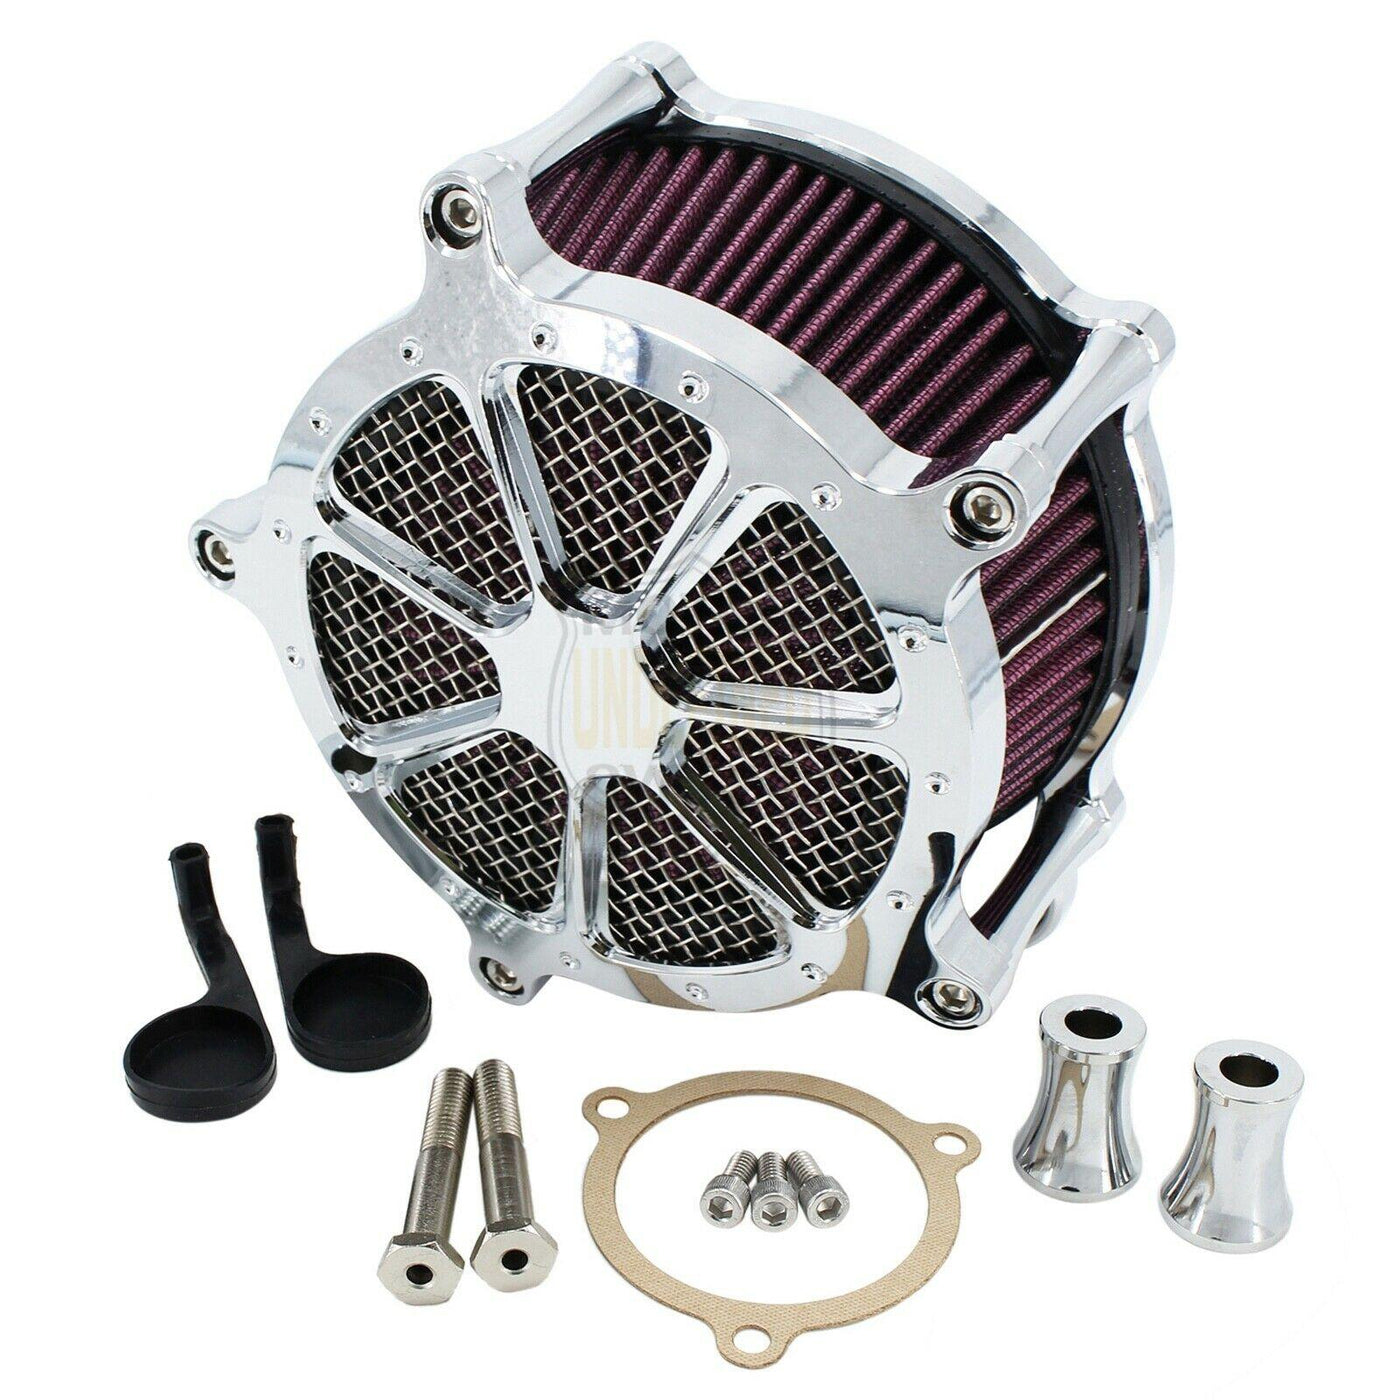 Air Cleaner Intake Filter For Harley Road King Electra Street Glide FLHX Softail - Moto Life Products